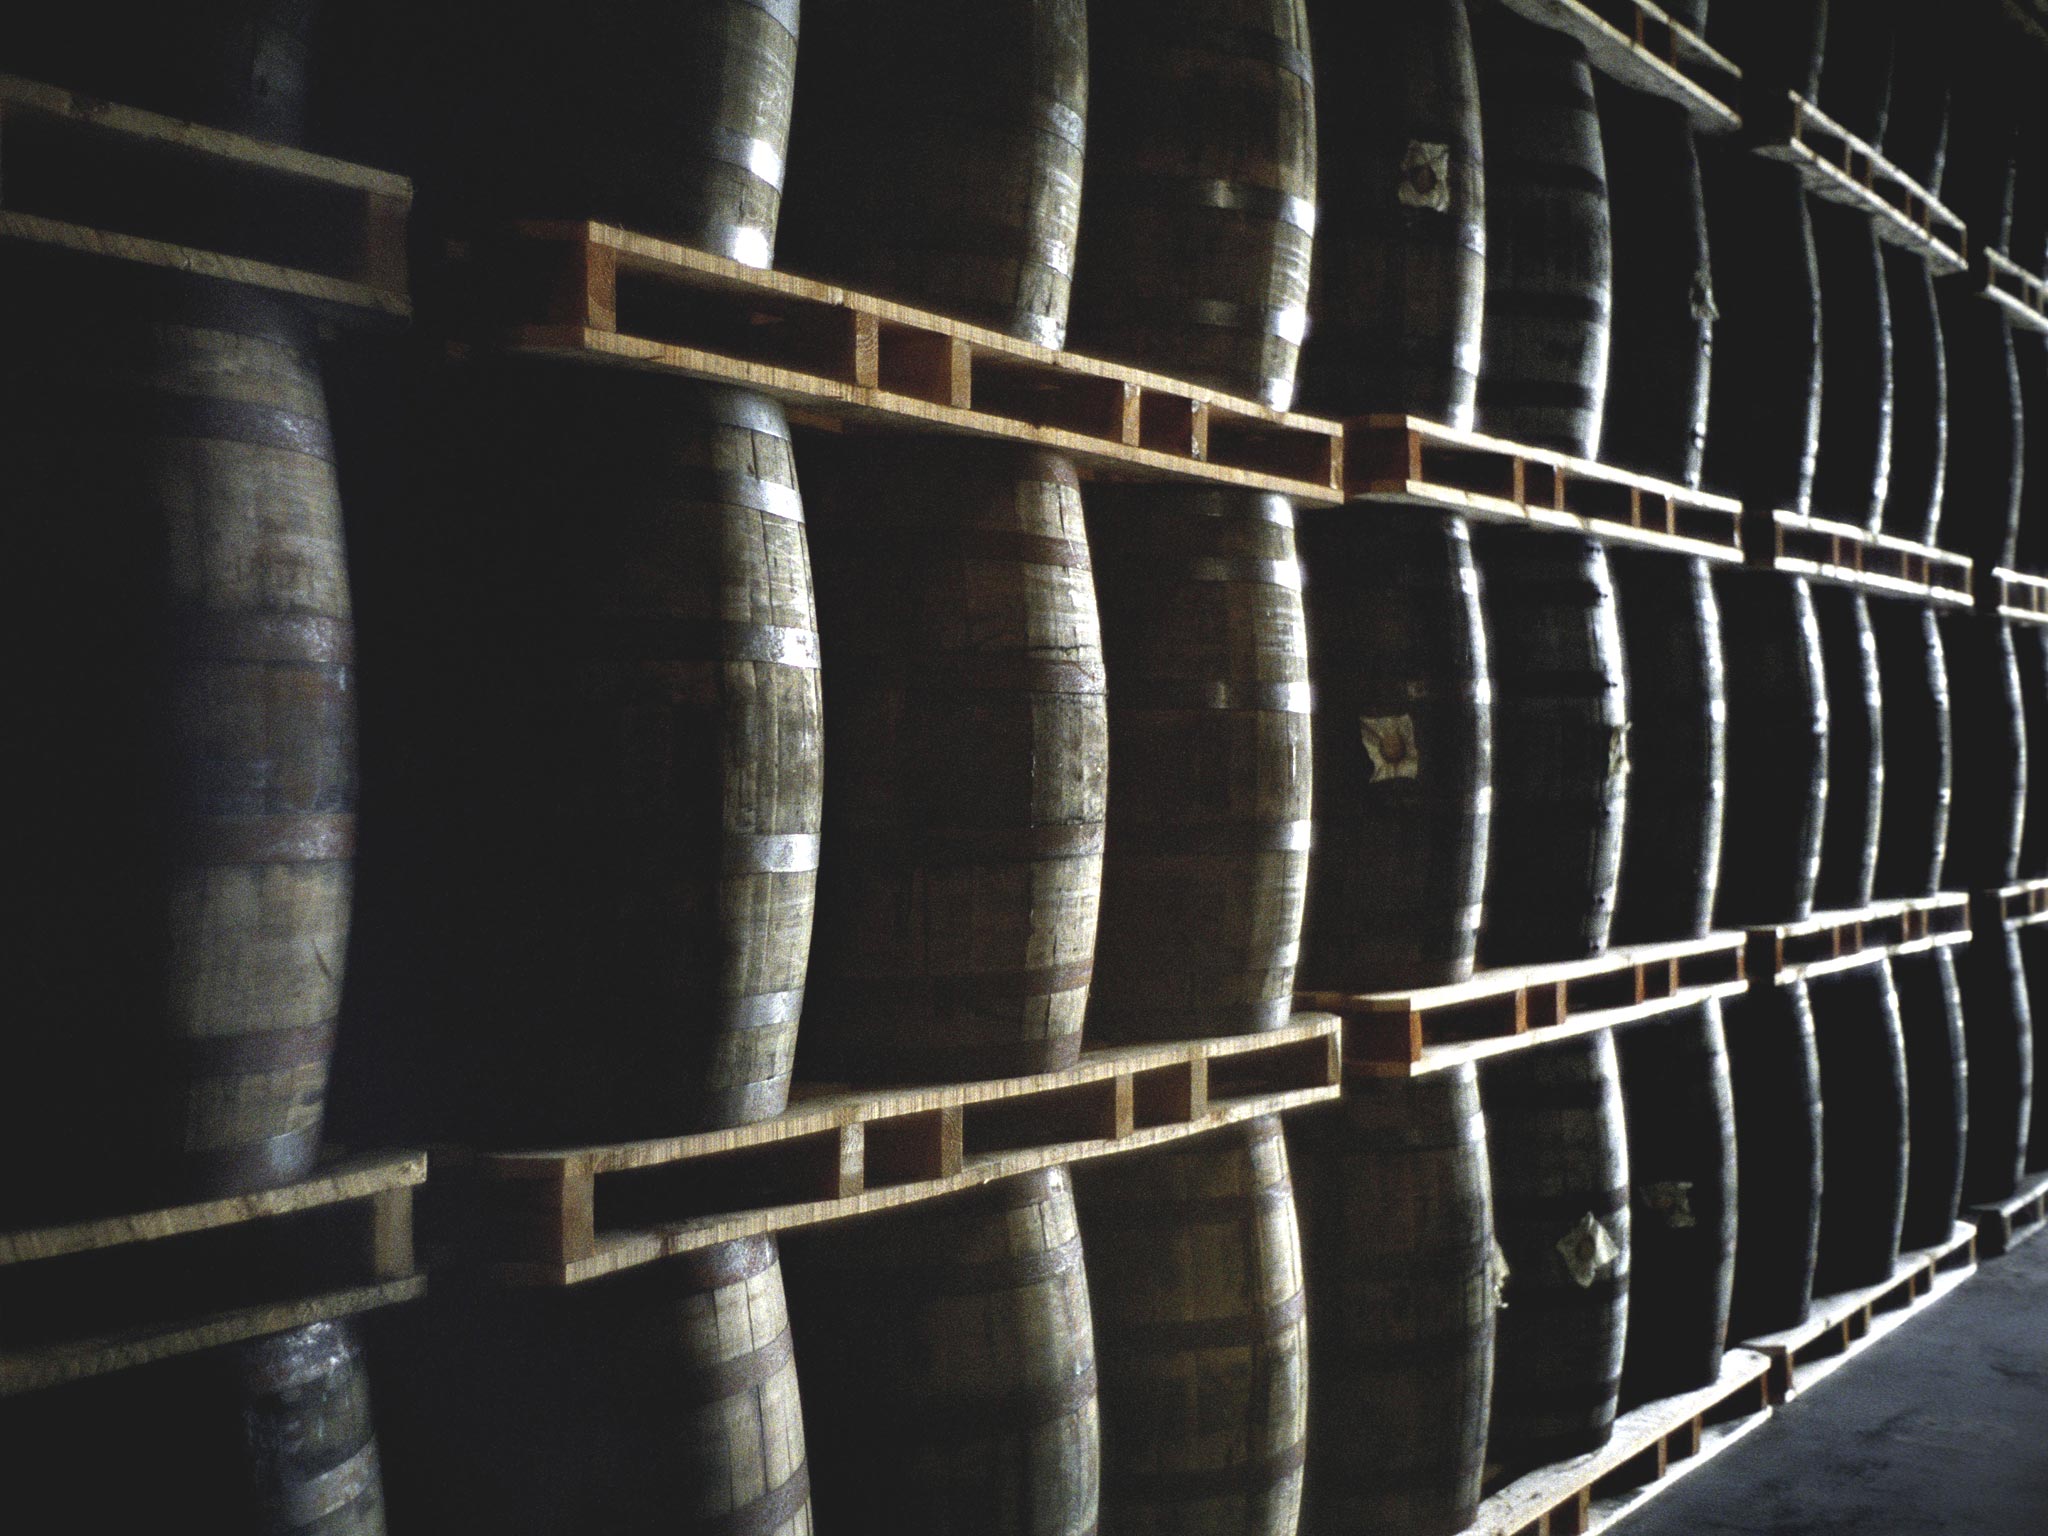 Scotch evaporates as it matures in barrels, which
activists link to a tough mould